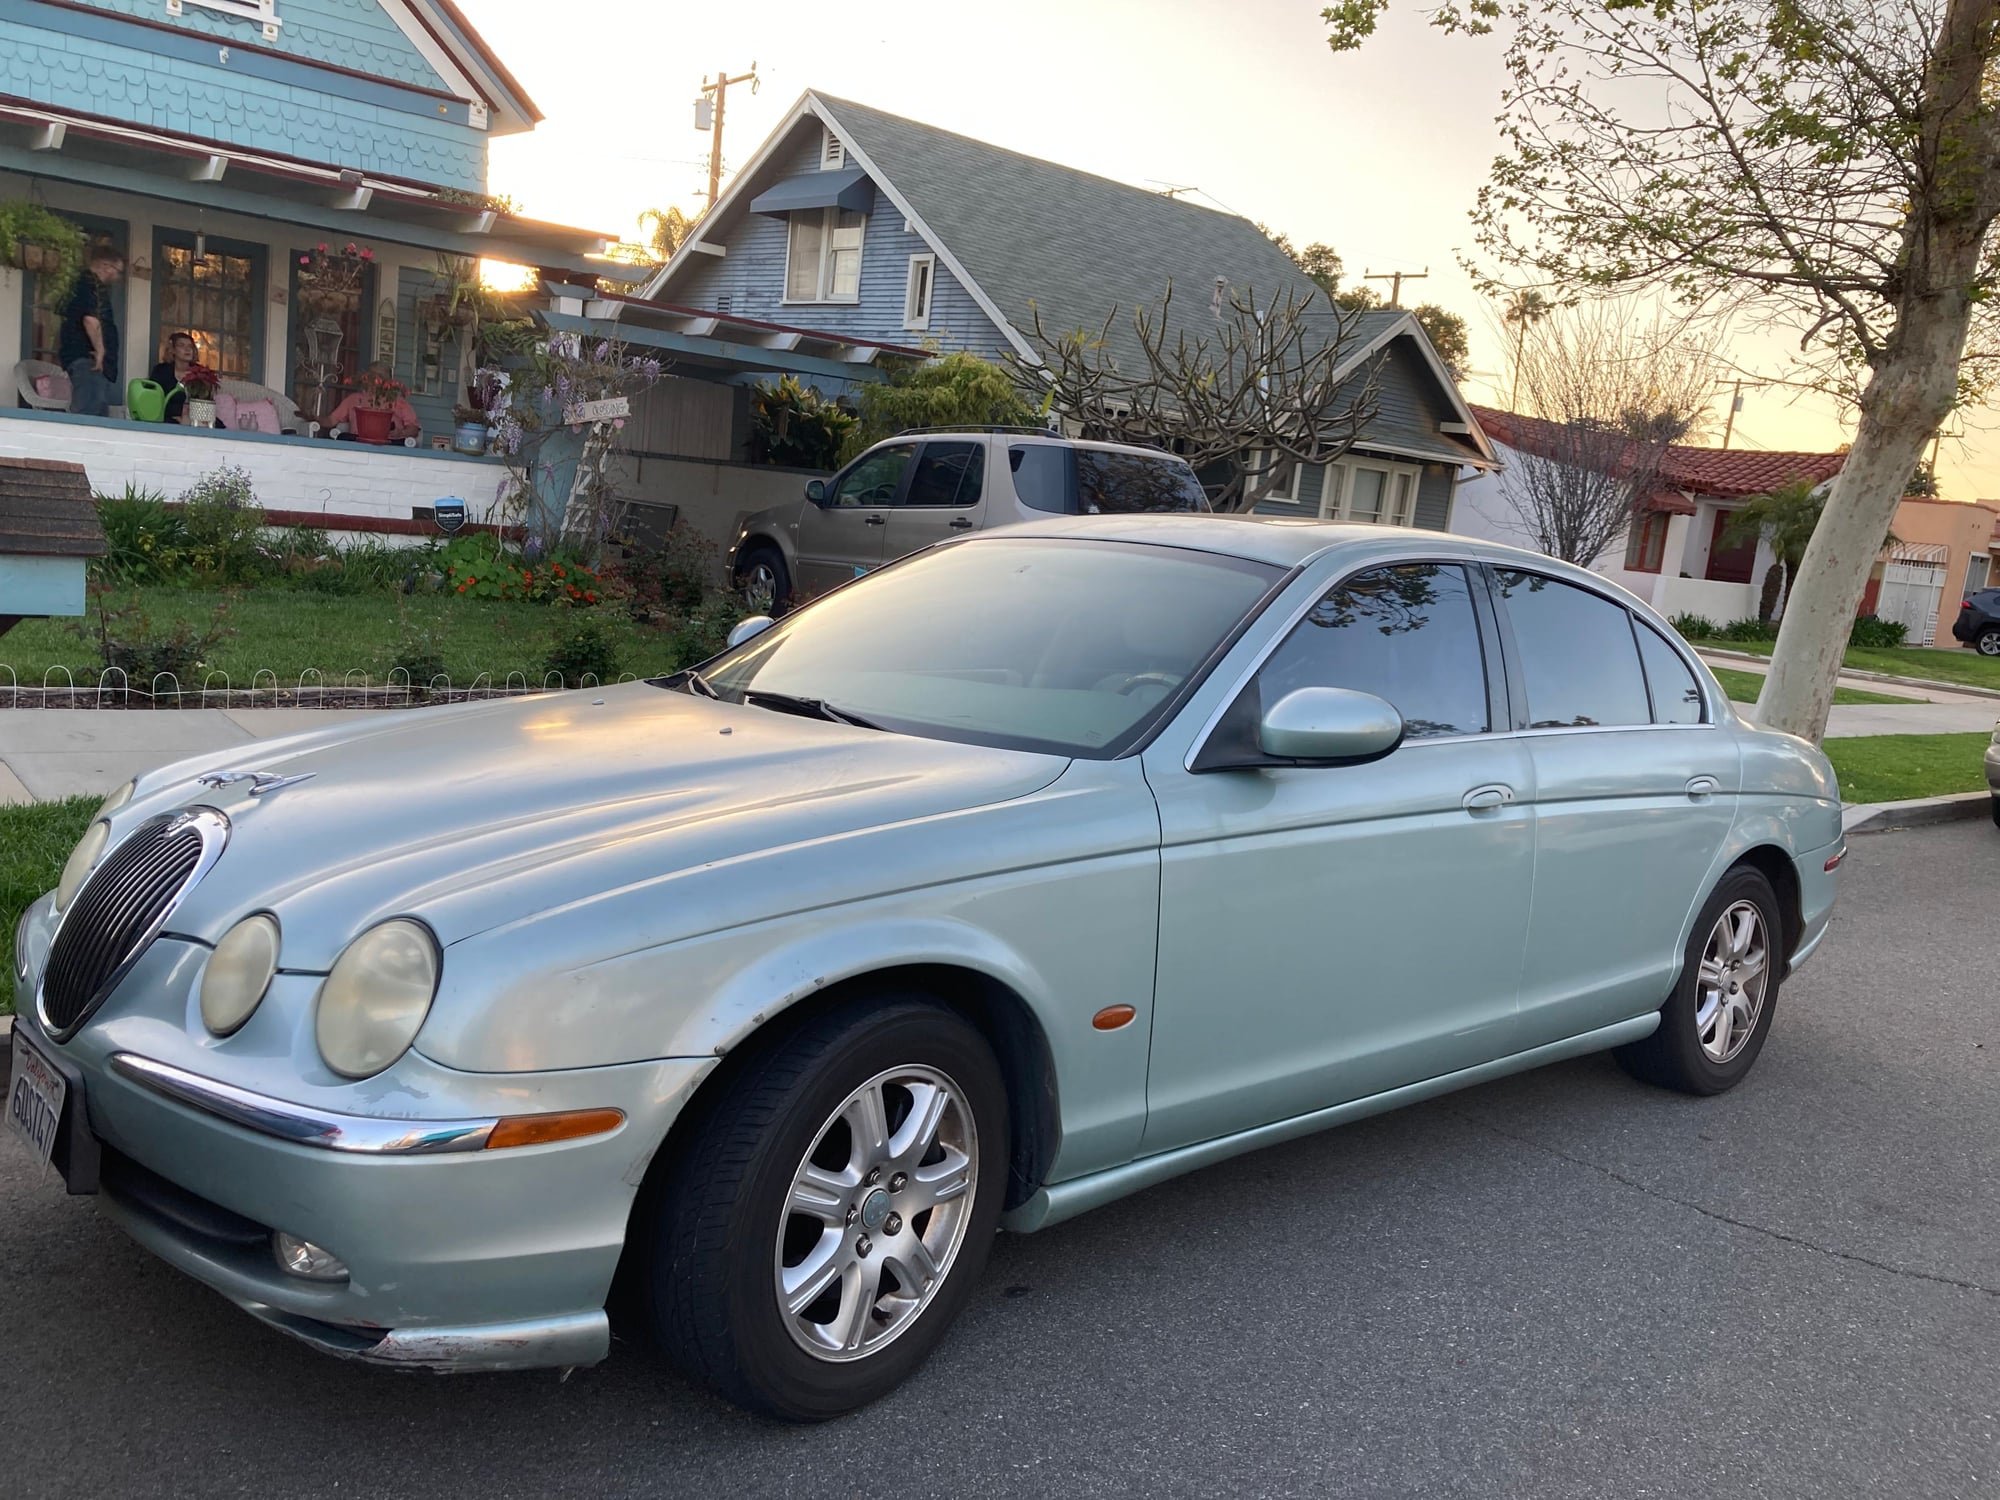 2003 Jaguar S-Type - 2003 Jaguar S Type is looking for a new home! - Used - VIN SAJEA01T43FM76539 - 200,203 Miles - 6 cyl - 2WD - Automatic - Sedan - Blue - Anaheim, CA 92805, United States